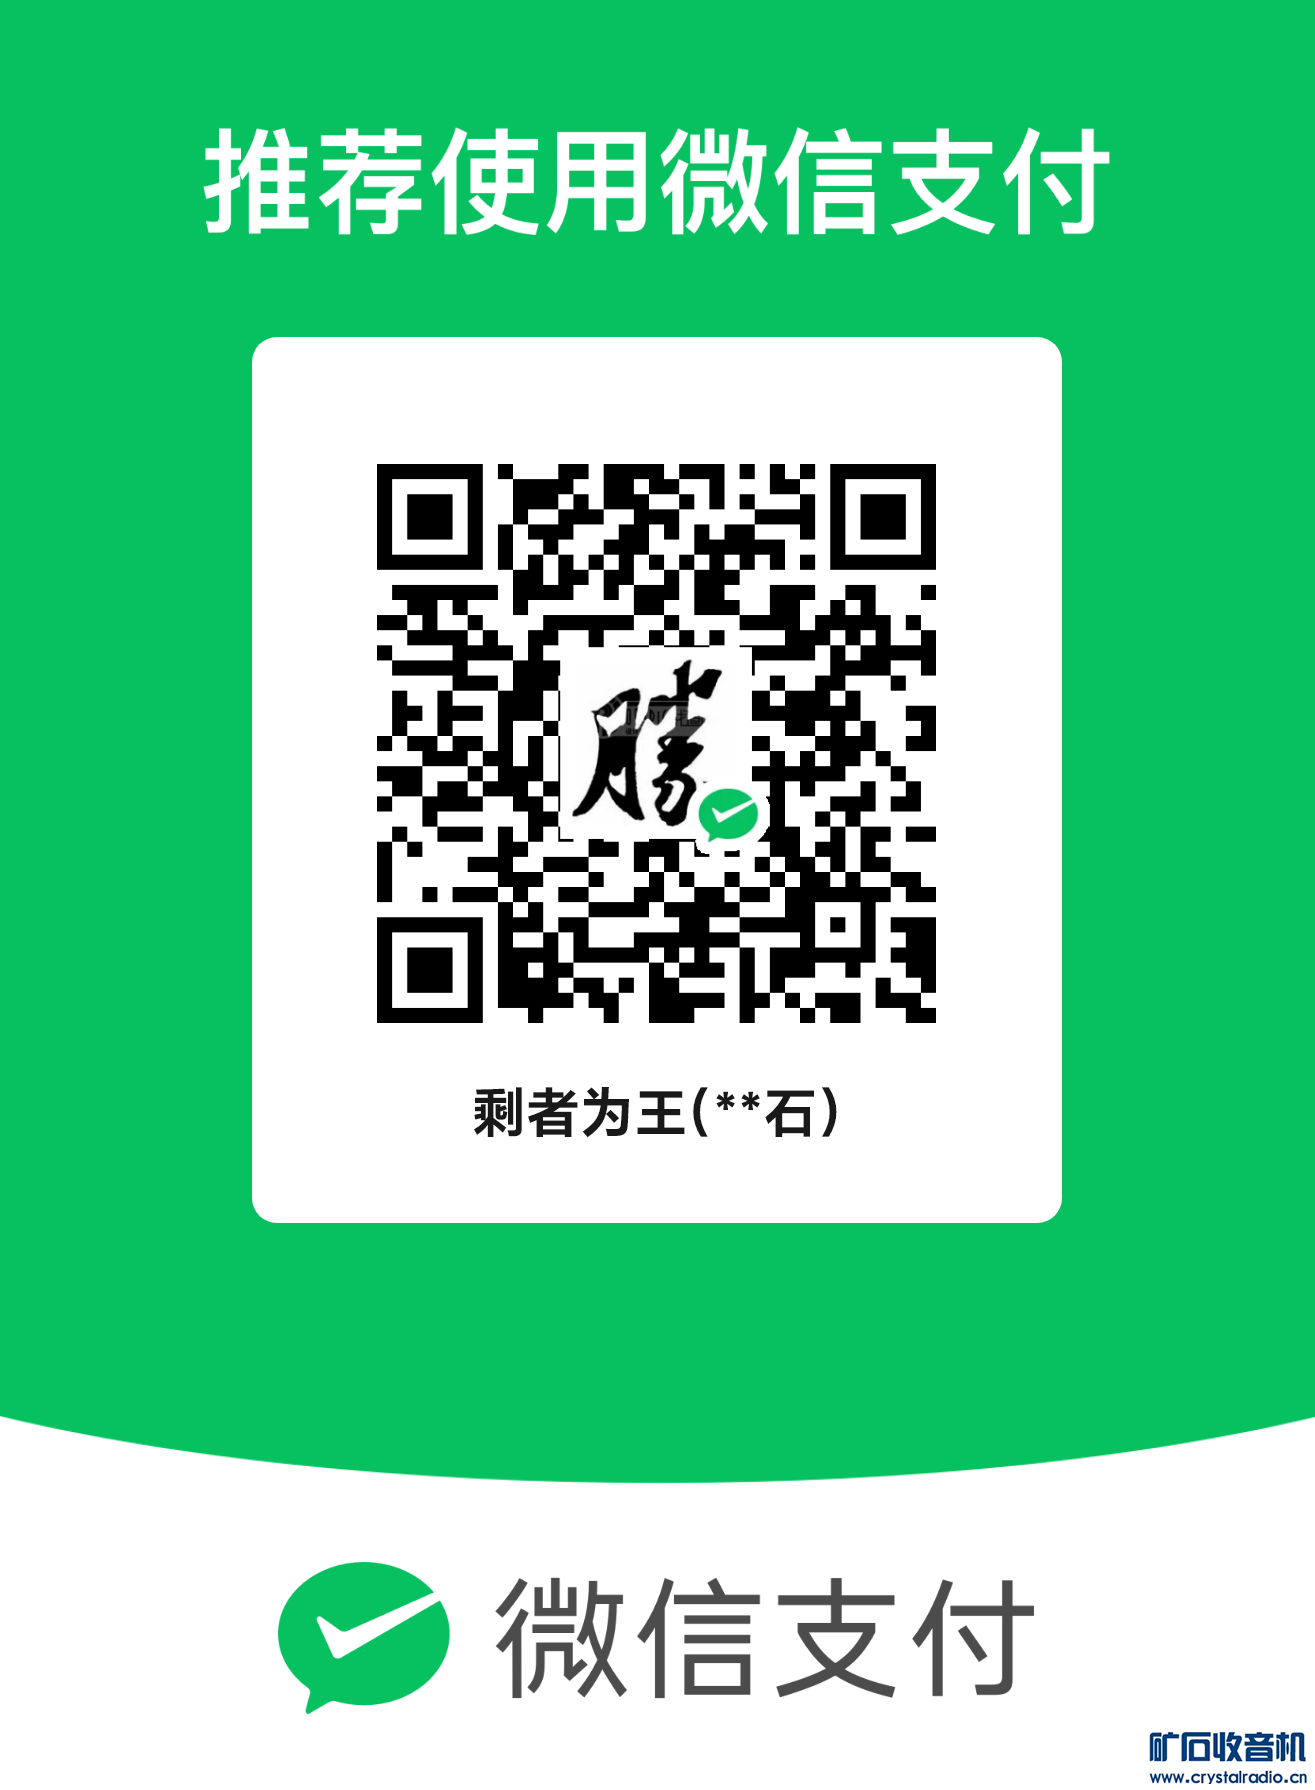 mm_facetoface_collect_qrcode_1681167310915.png